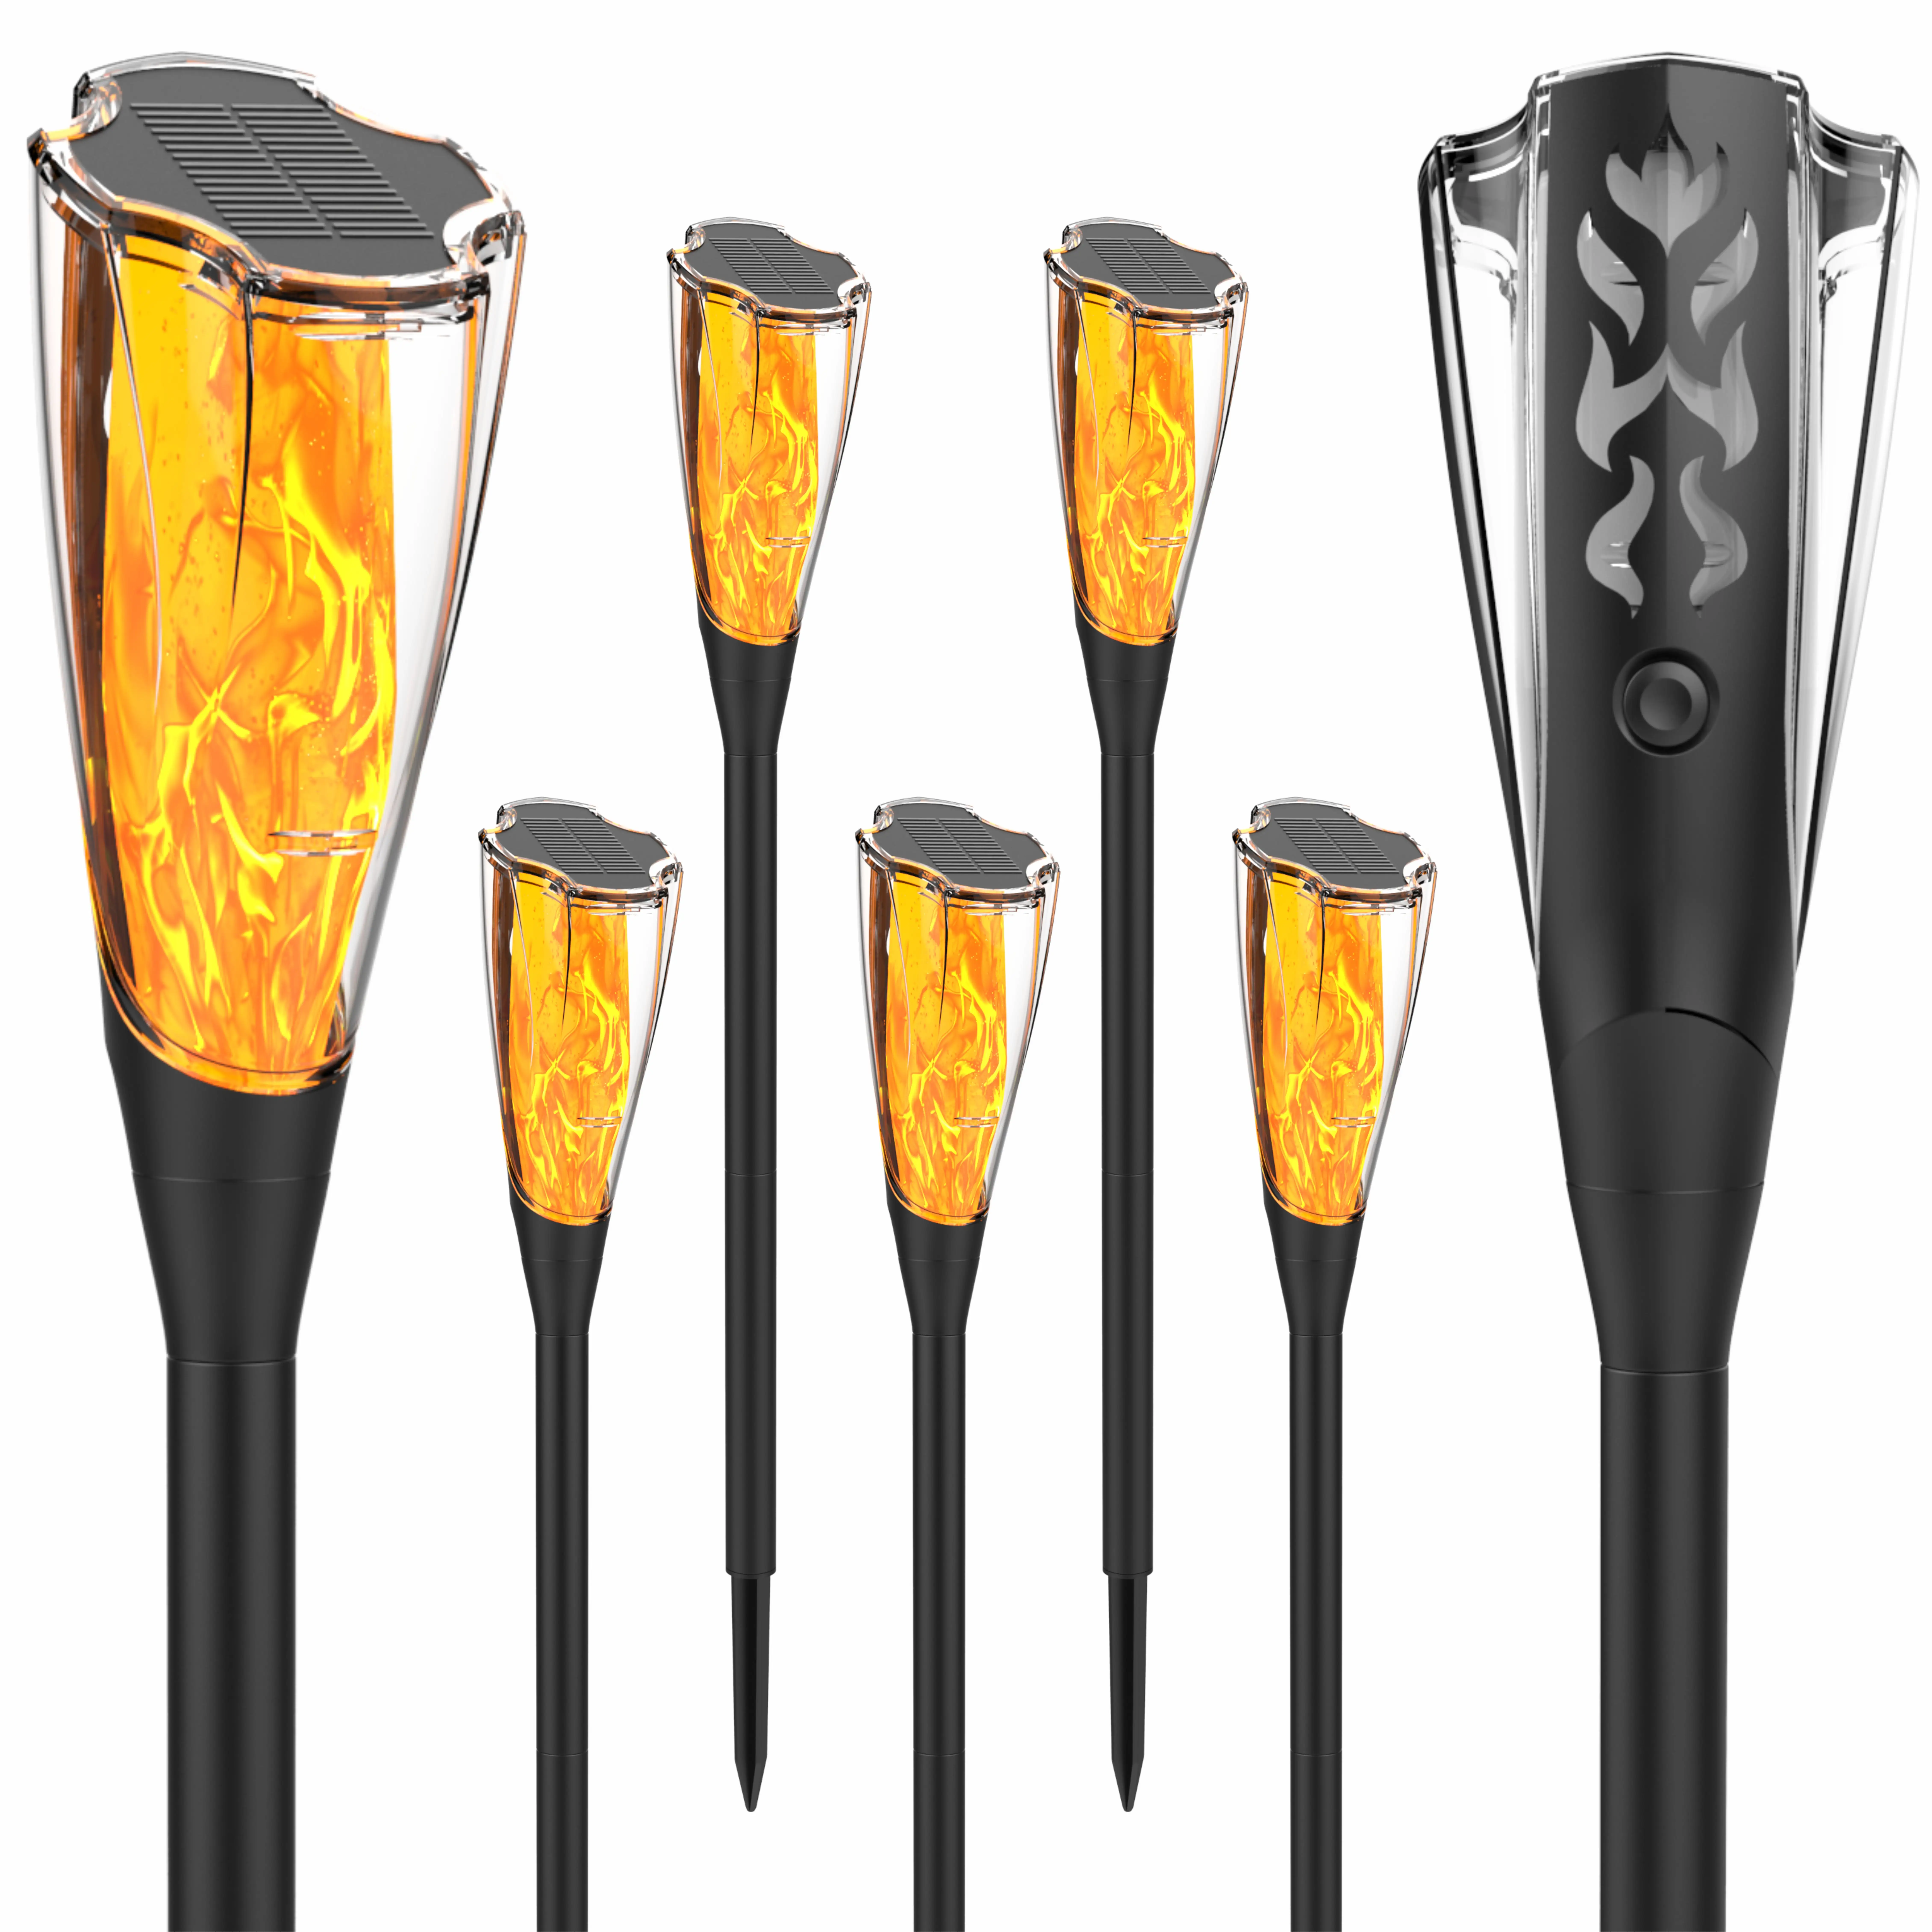 LED Torch Lights Auto On/Off Outdoor Solar Tiki Torches Garden Lights with Flickering Flame Decorative